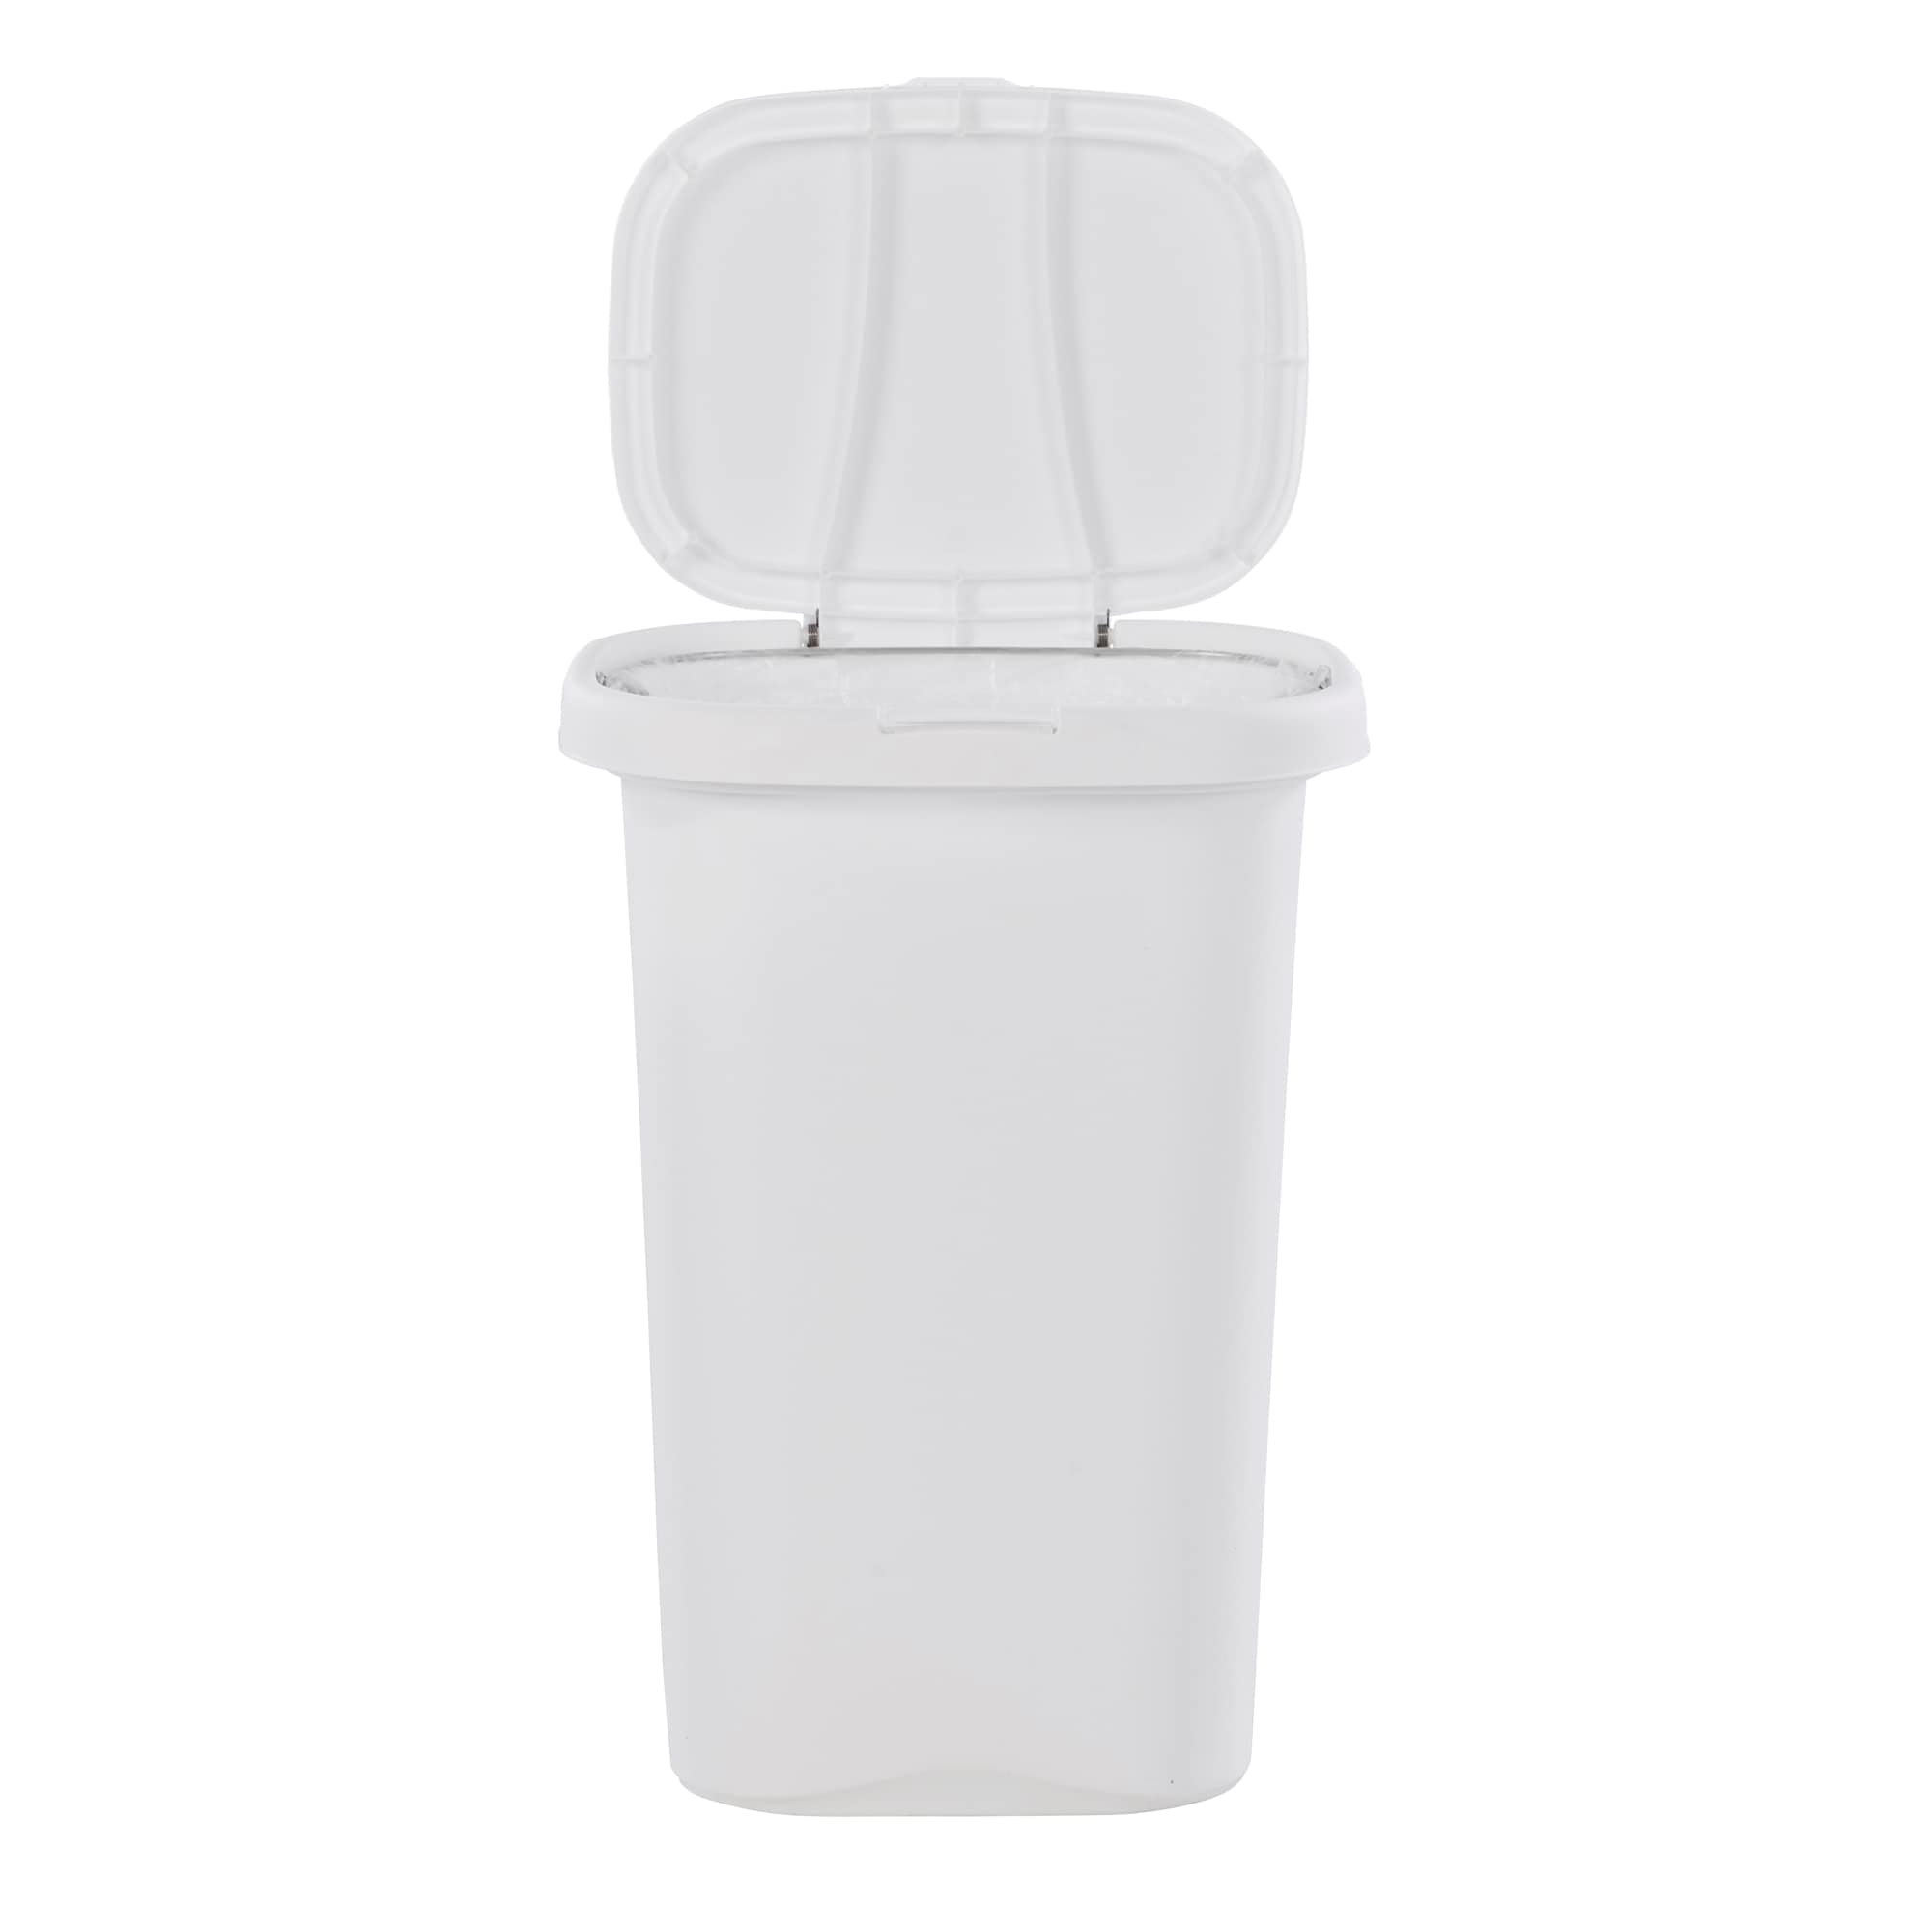 Plastic MITSICO Kitchen Hanging Trash Can with Lid Double Sided